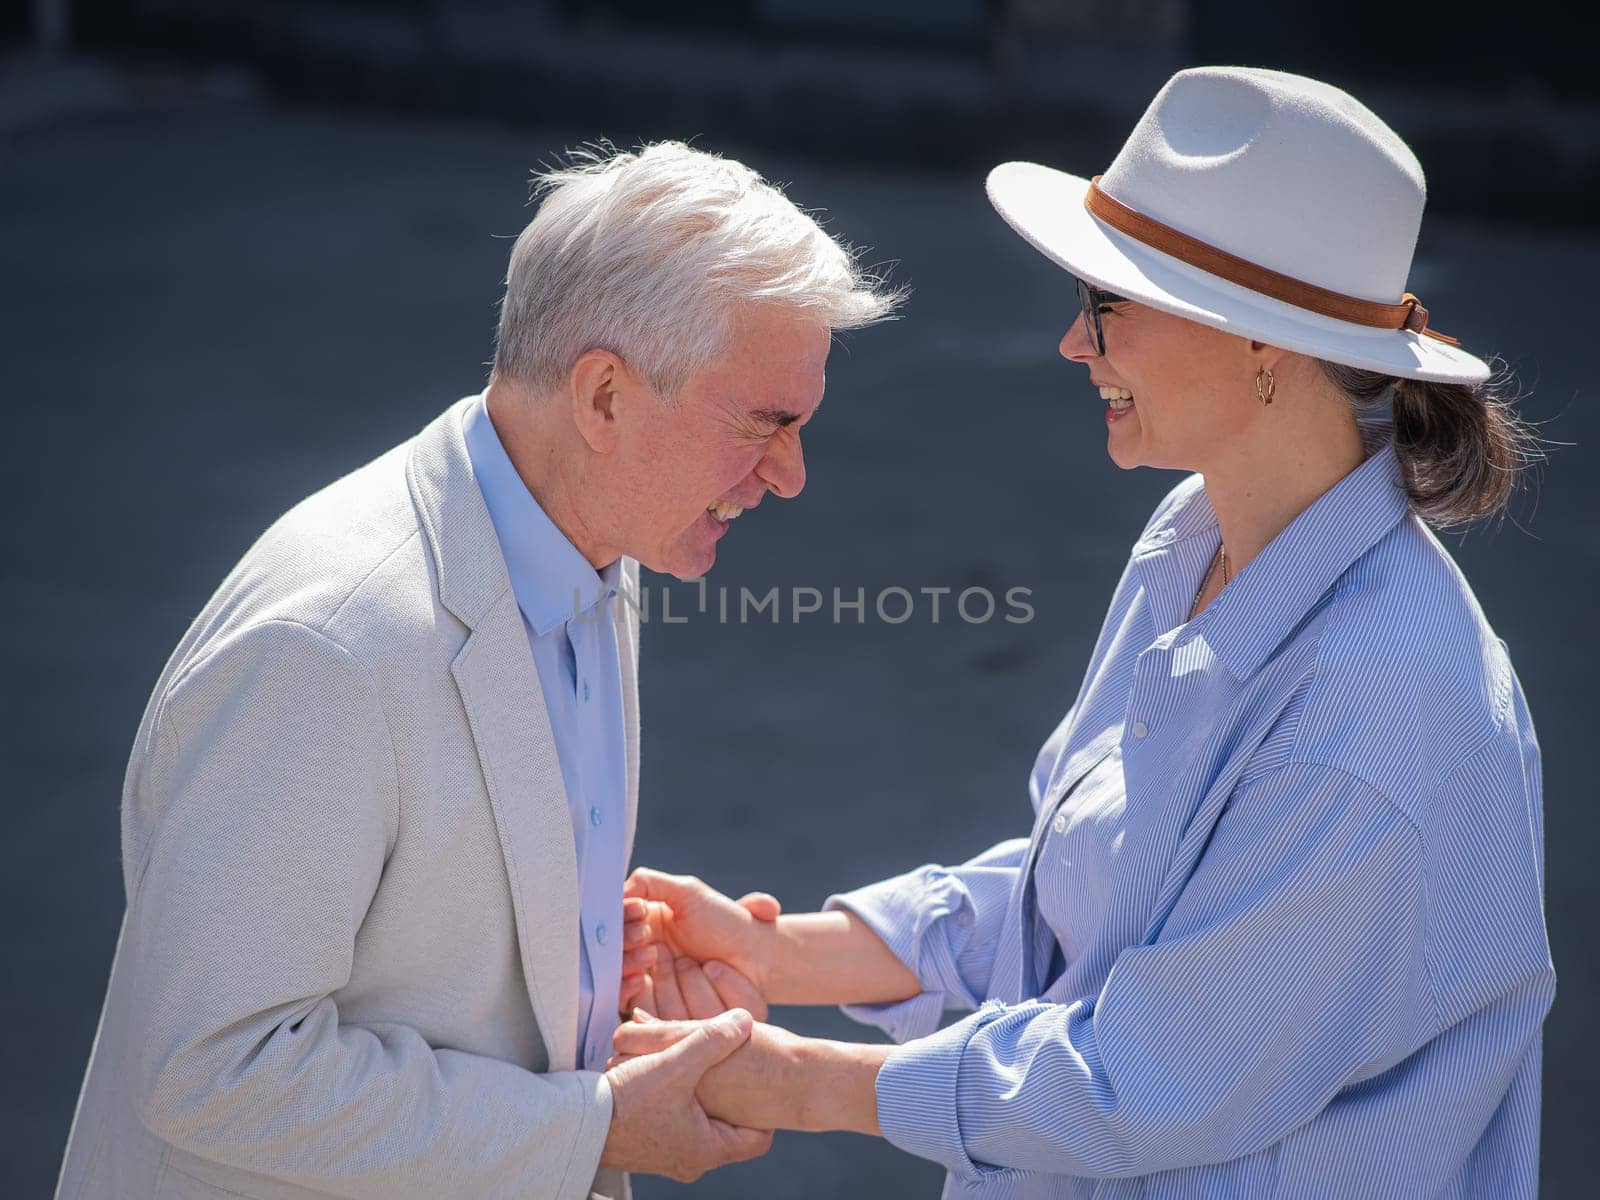 Stylish elderly laughing couple on a walk. Romantic relationships of mature people. by mrwed54